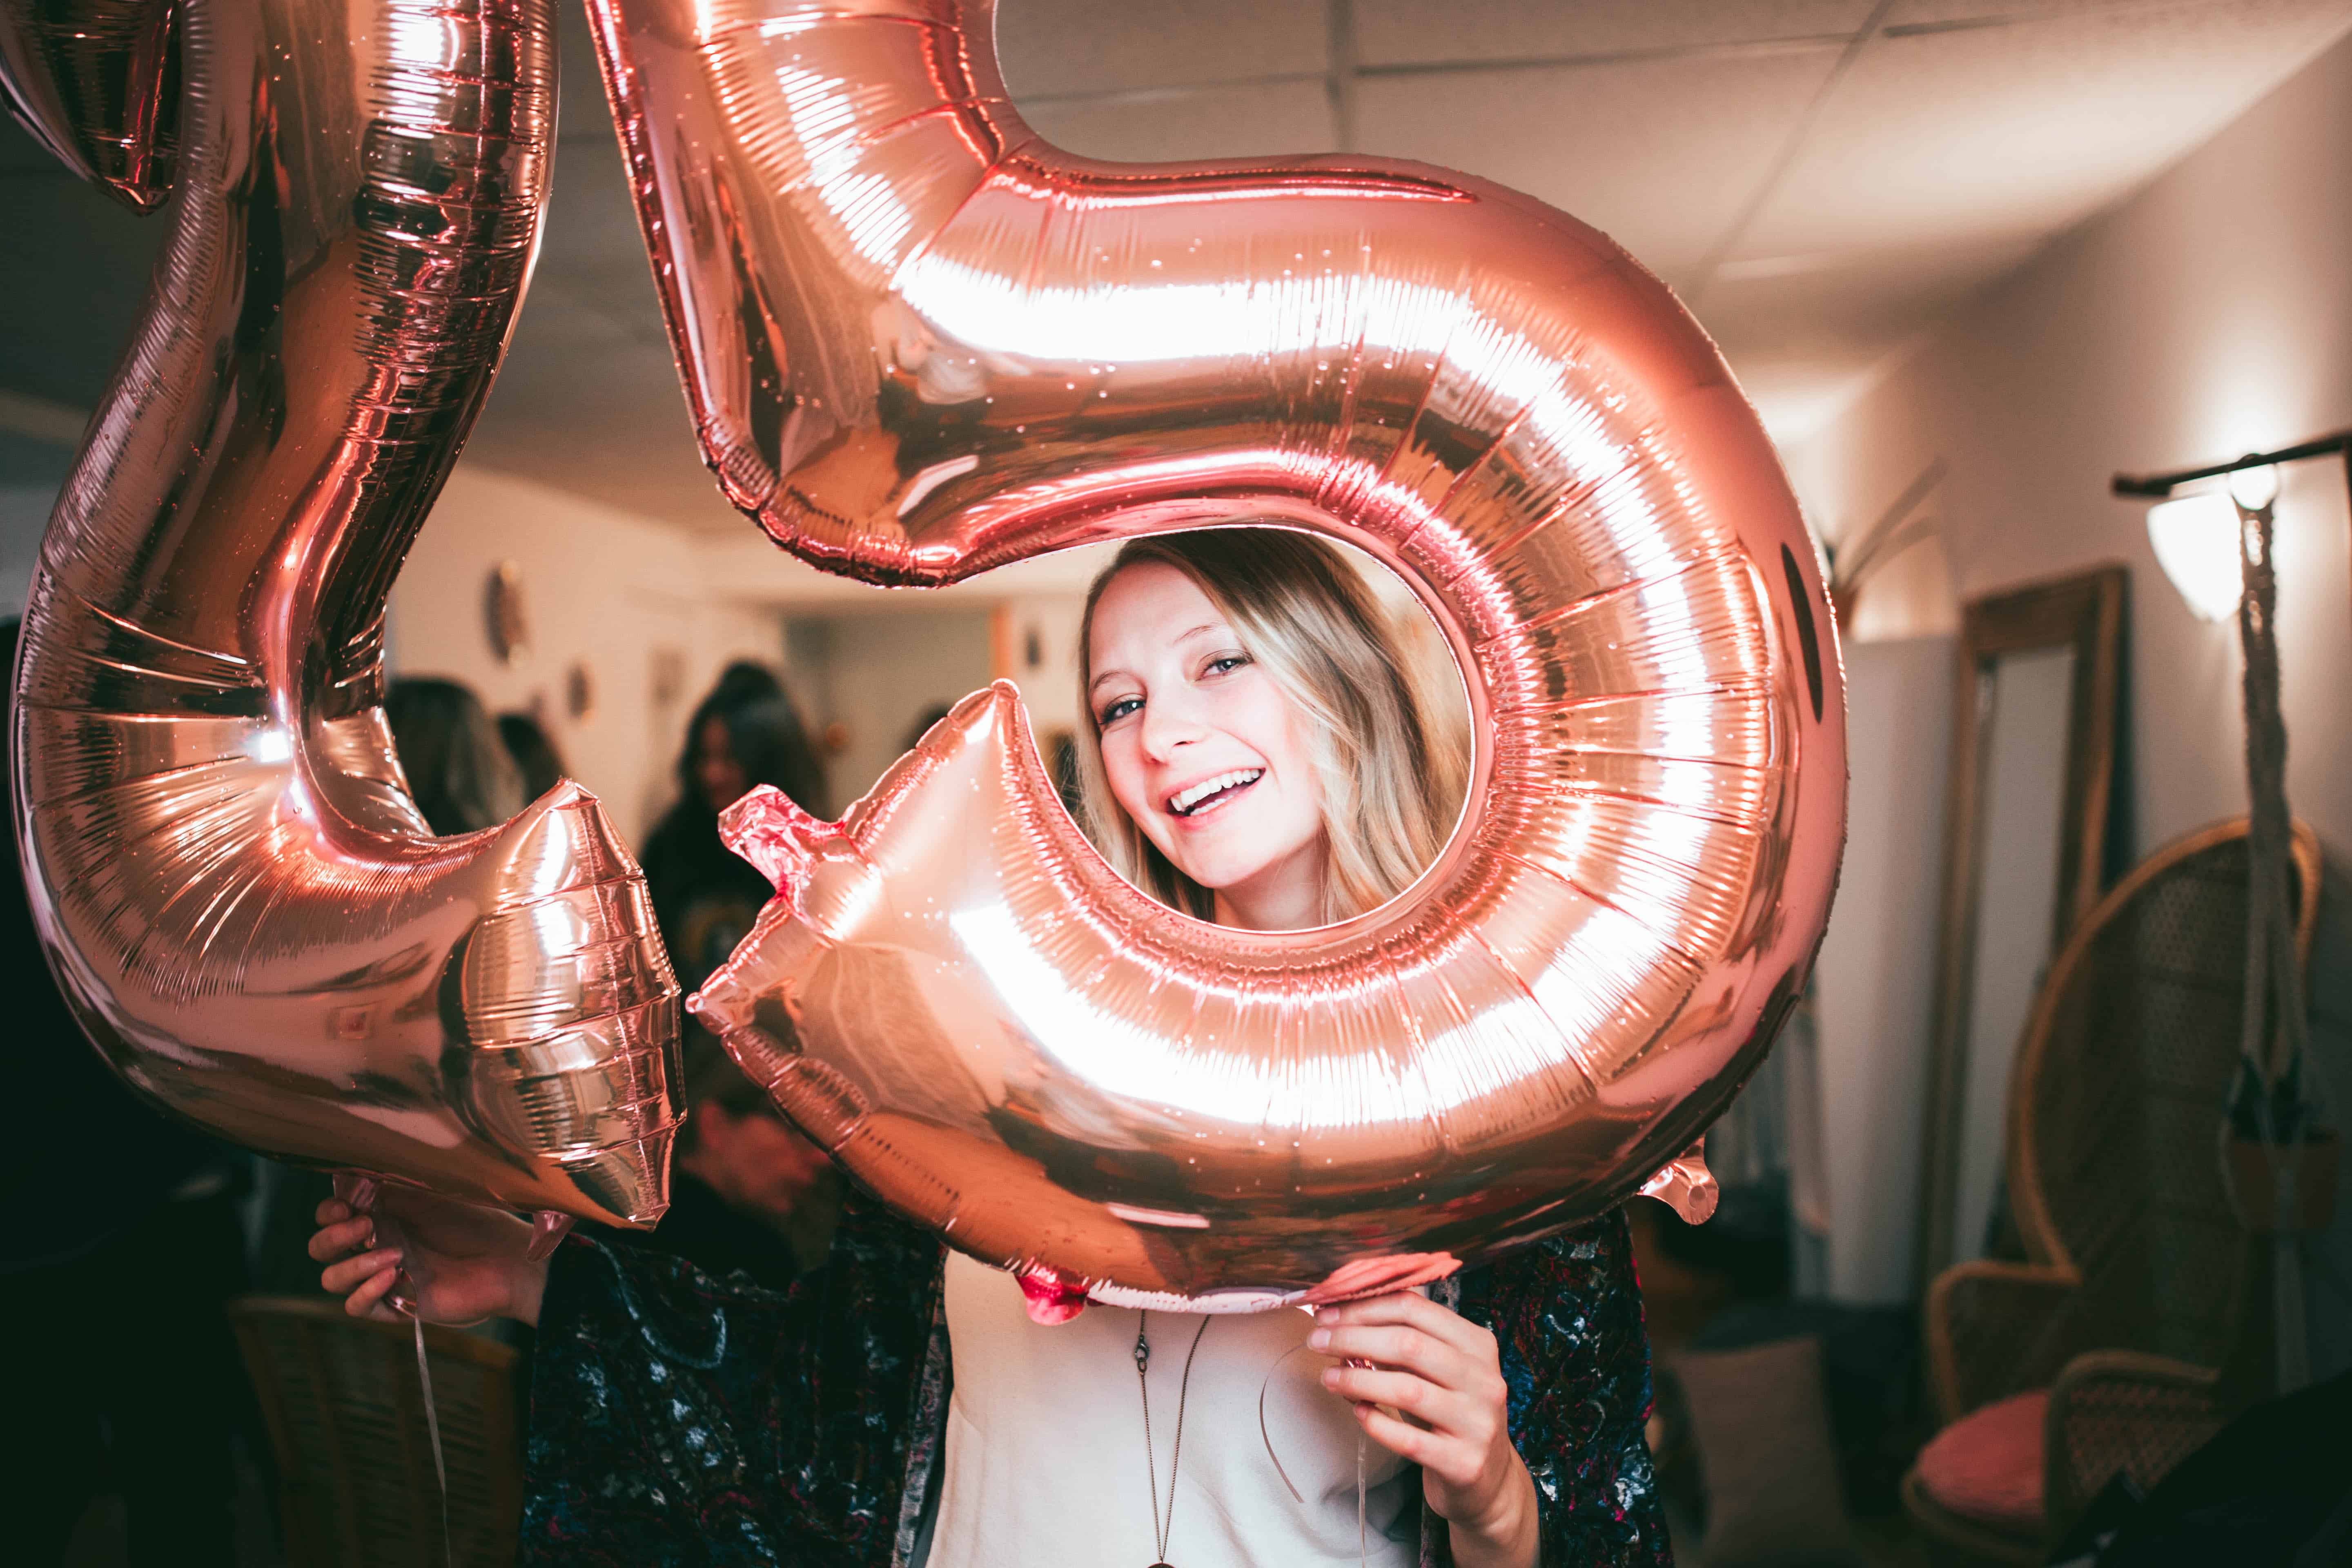 A happy woman smiles and holds birthday balloons with the number 25 on it